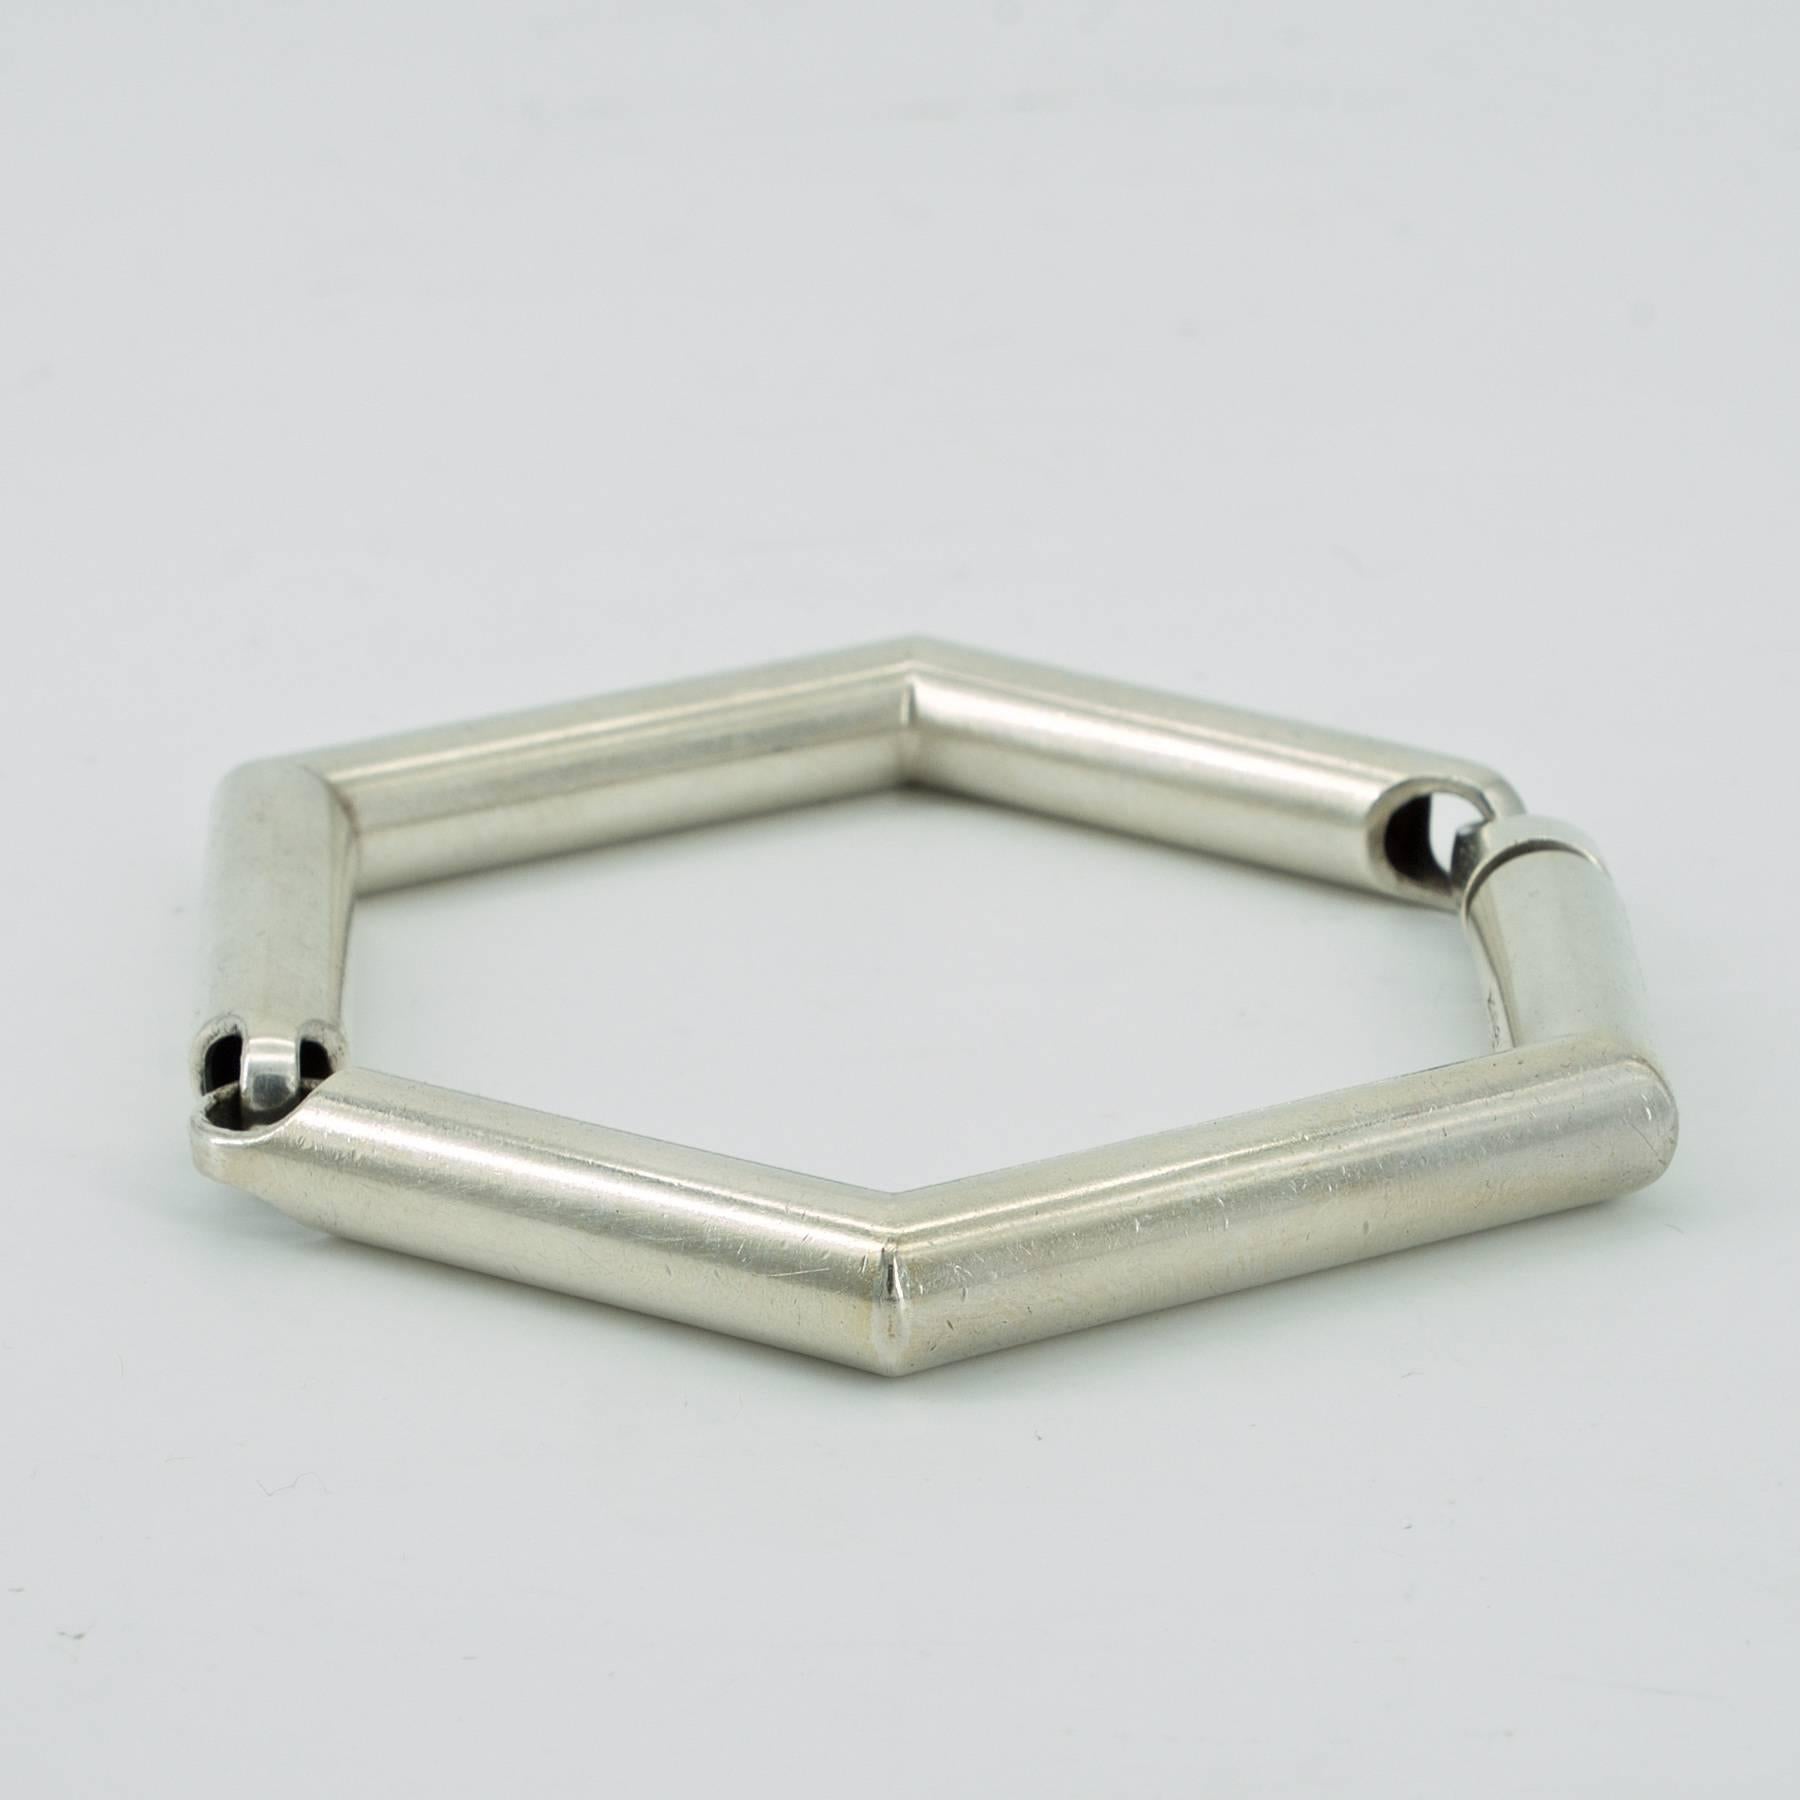 A rare and well loved Minimalist Scandinavian 1970s modernist sterling silver hexagonal bangle. A seldom offered design, versatile, and comfortable with a strong flush clasp.
Size (in closed position): 7.3 x 7.3 x 0.8 cm (2.87 x 2.87 x 0.31